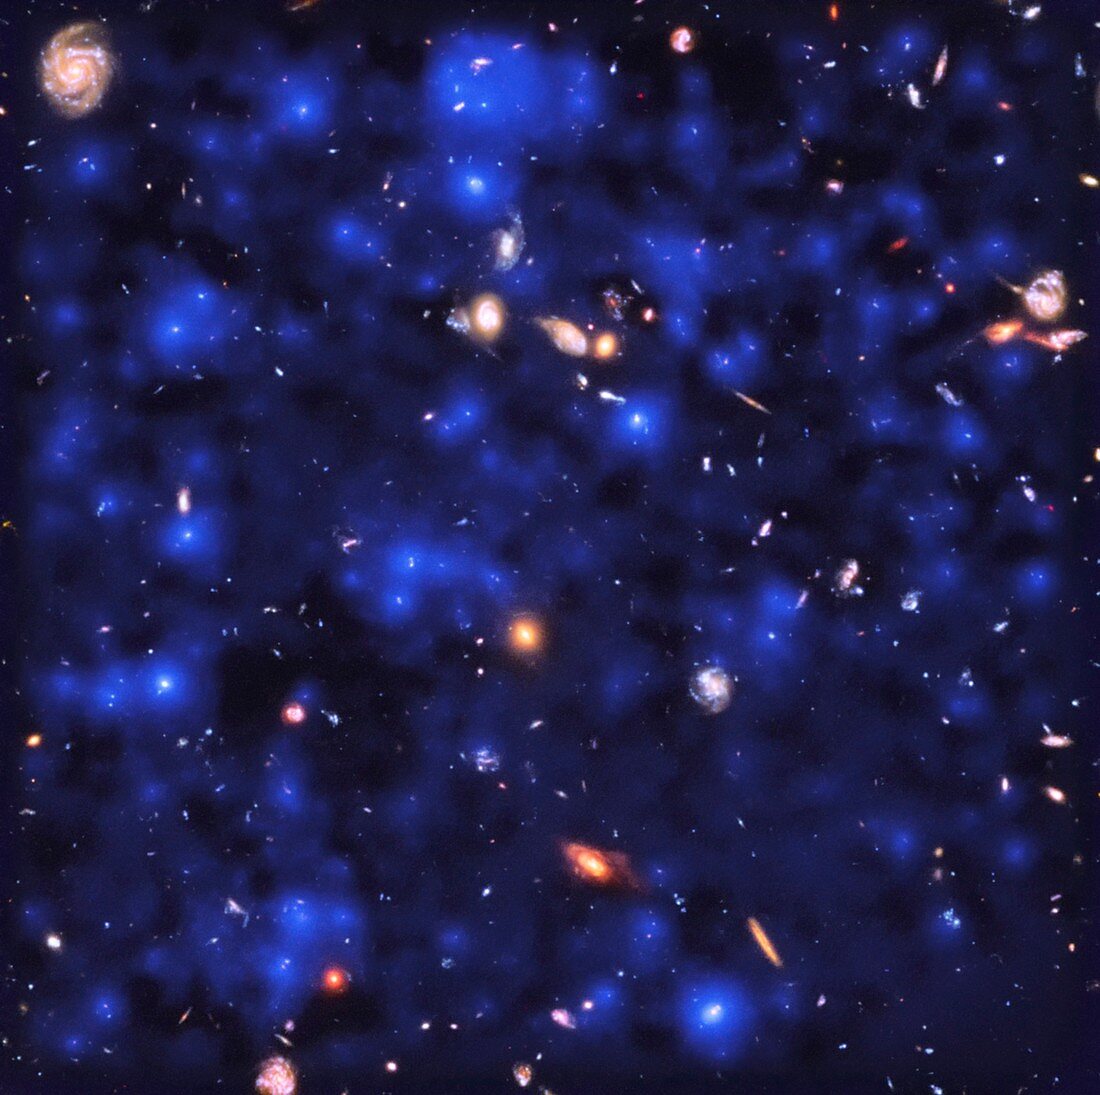 Hydrogen emissions in the early universe, VLT image